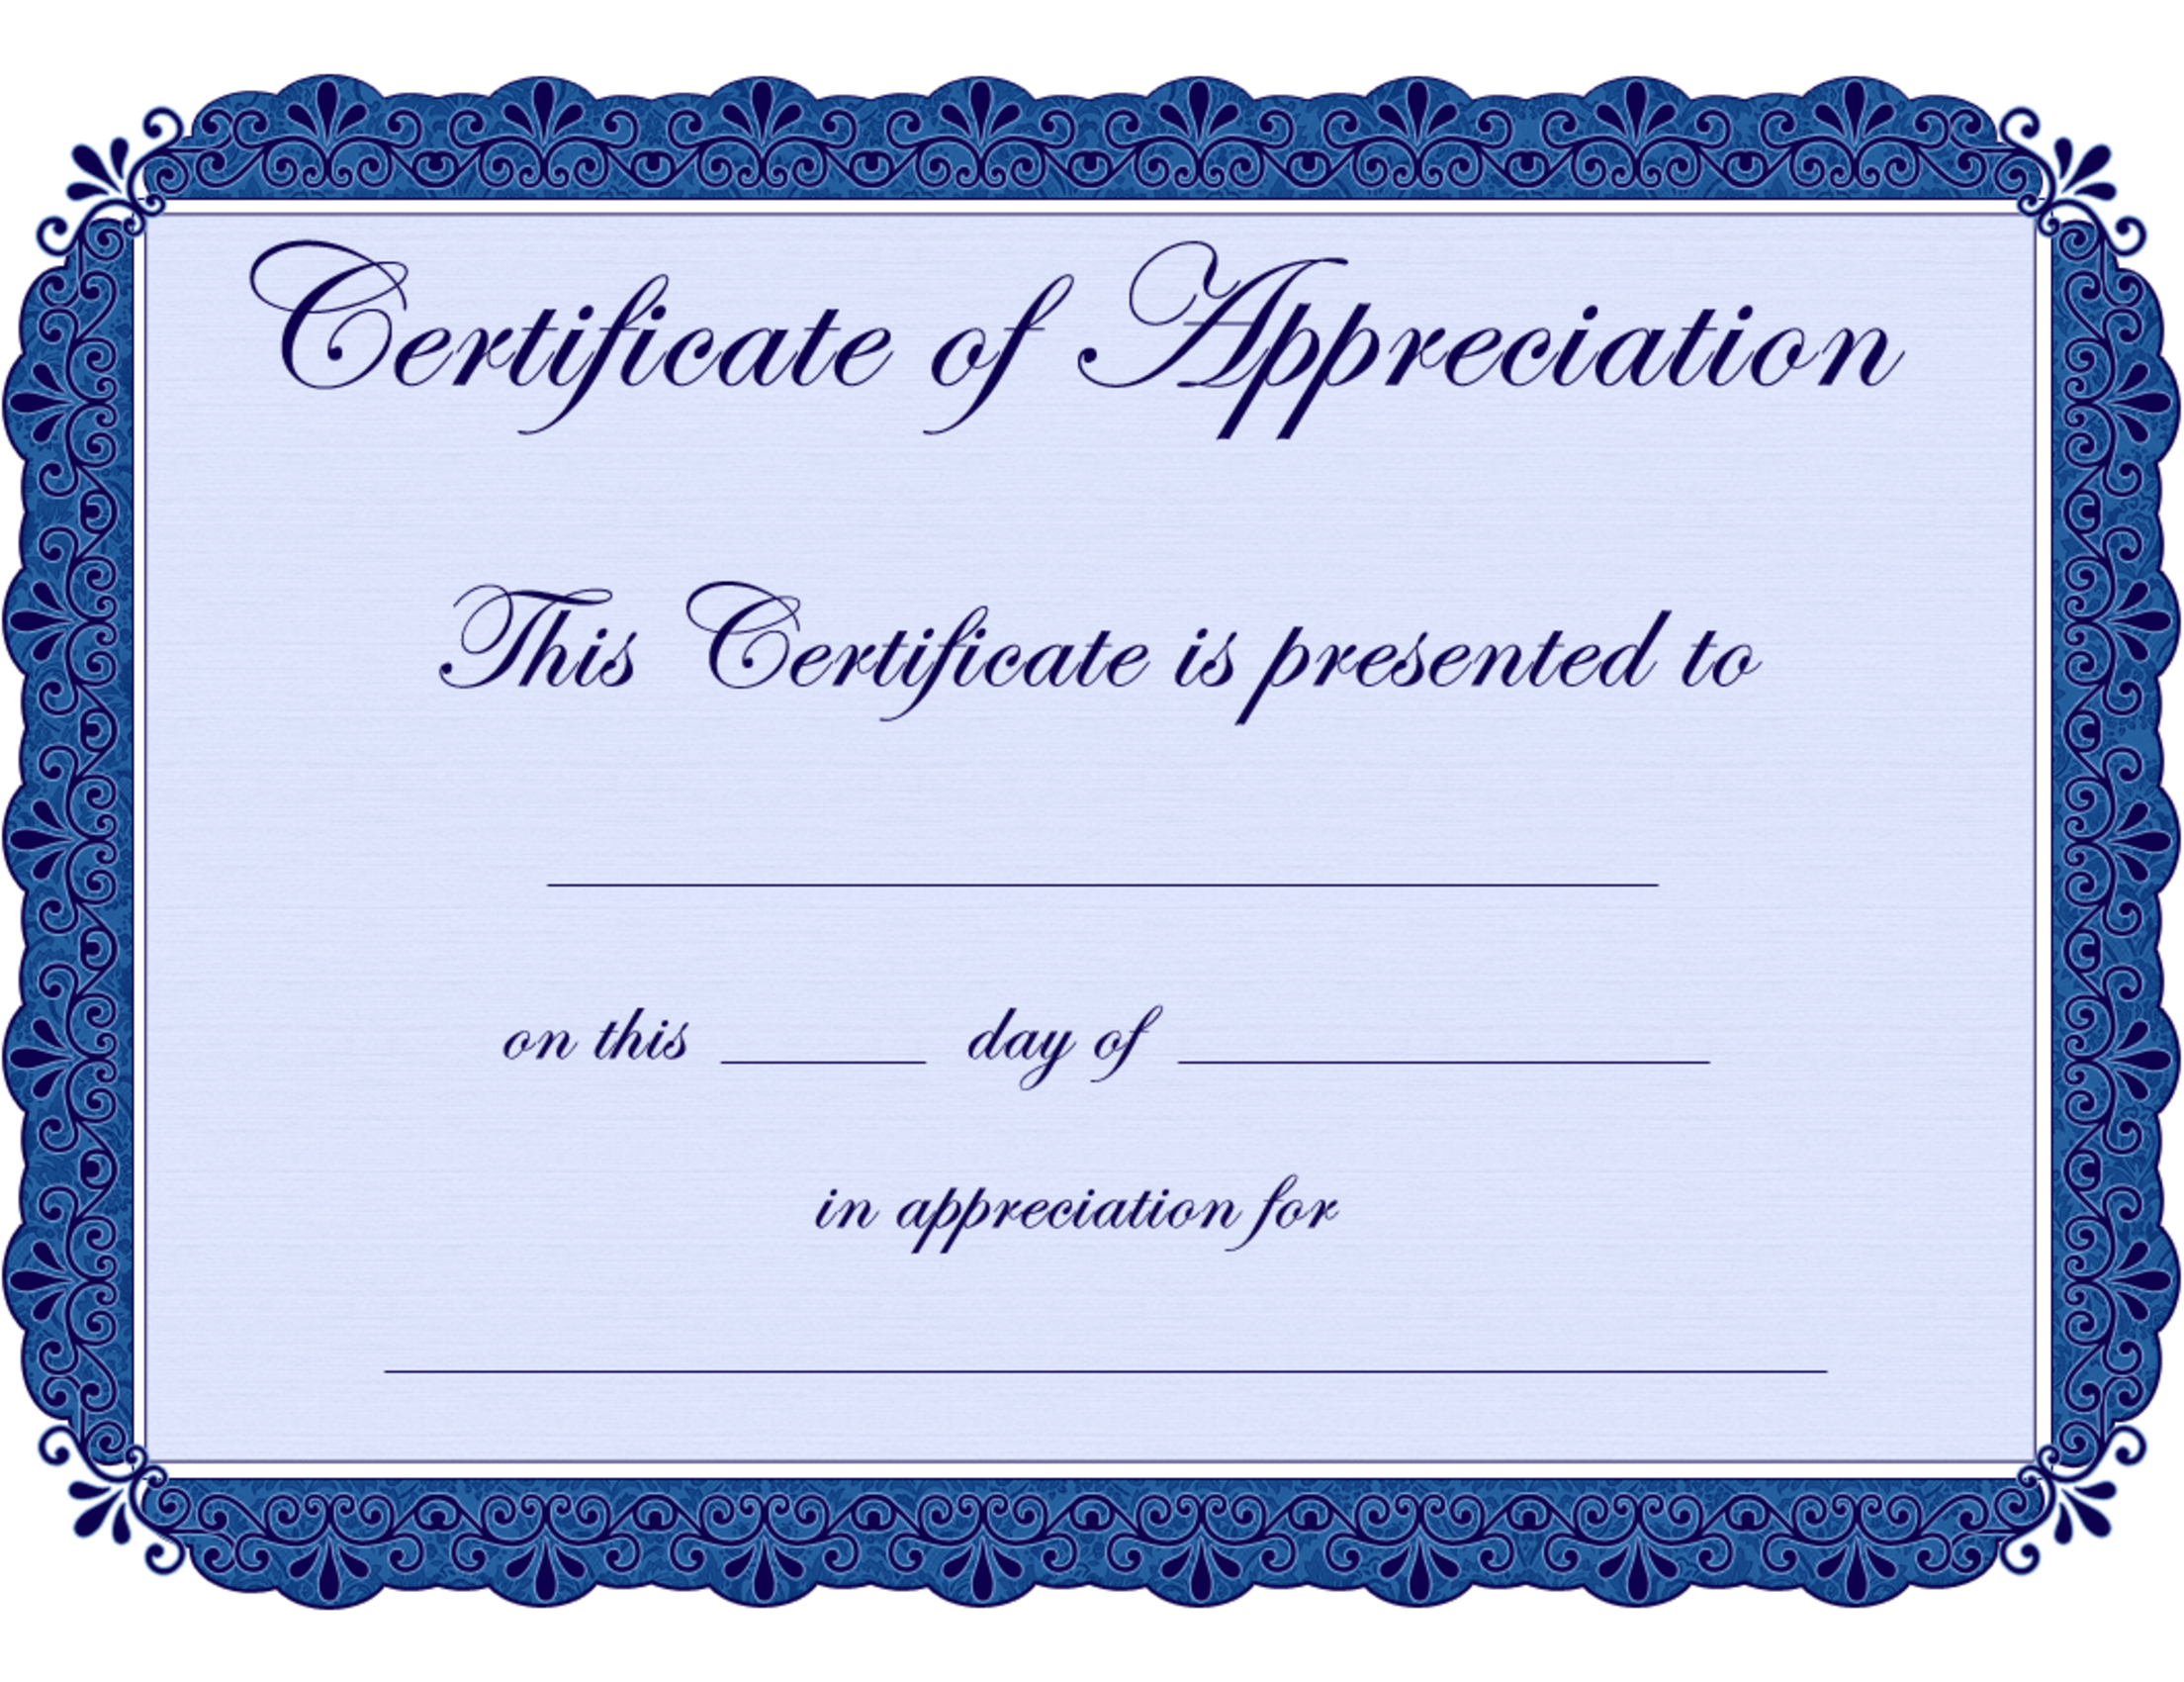 Free Printable Certificates Certificate Of Appreciation Throughout Microsoft Office Certificate Templates Free